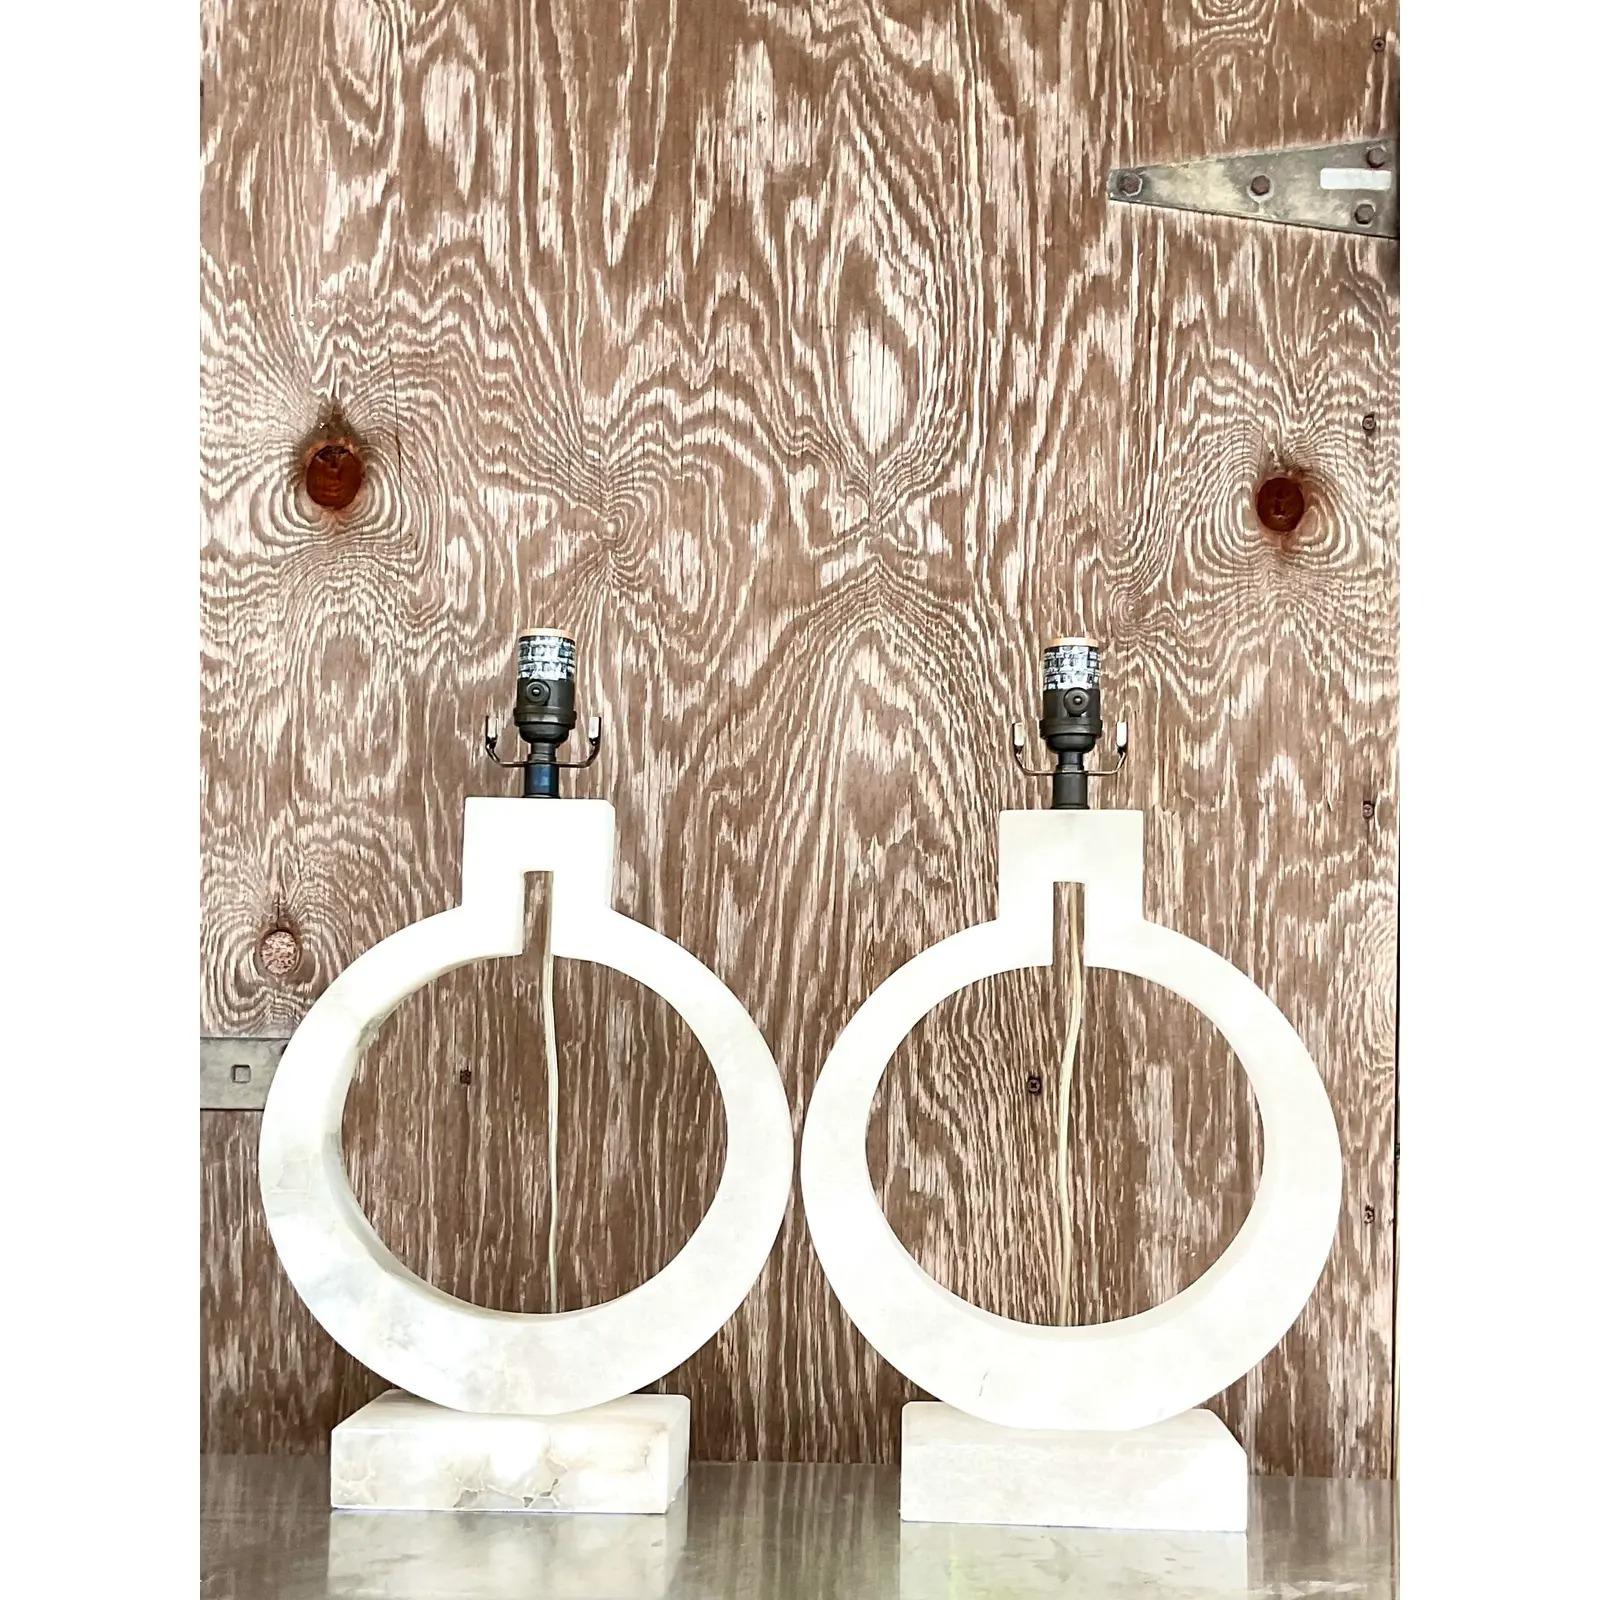 A fabulous pair of vintage Contemporary table lamps. Designed by EF Chapman for Visual Comfort. A chic faux alabaster composite in a modern ring shape. Acquired from a Palm Beach estate.

The lamps are in great vintage condition. Minor scuffs and